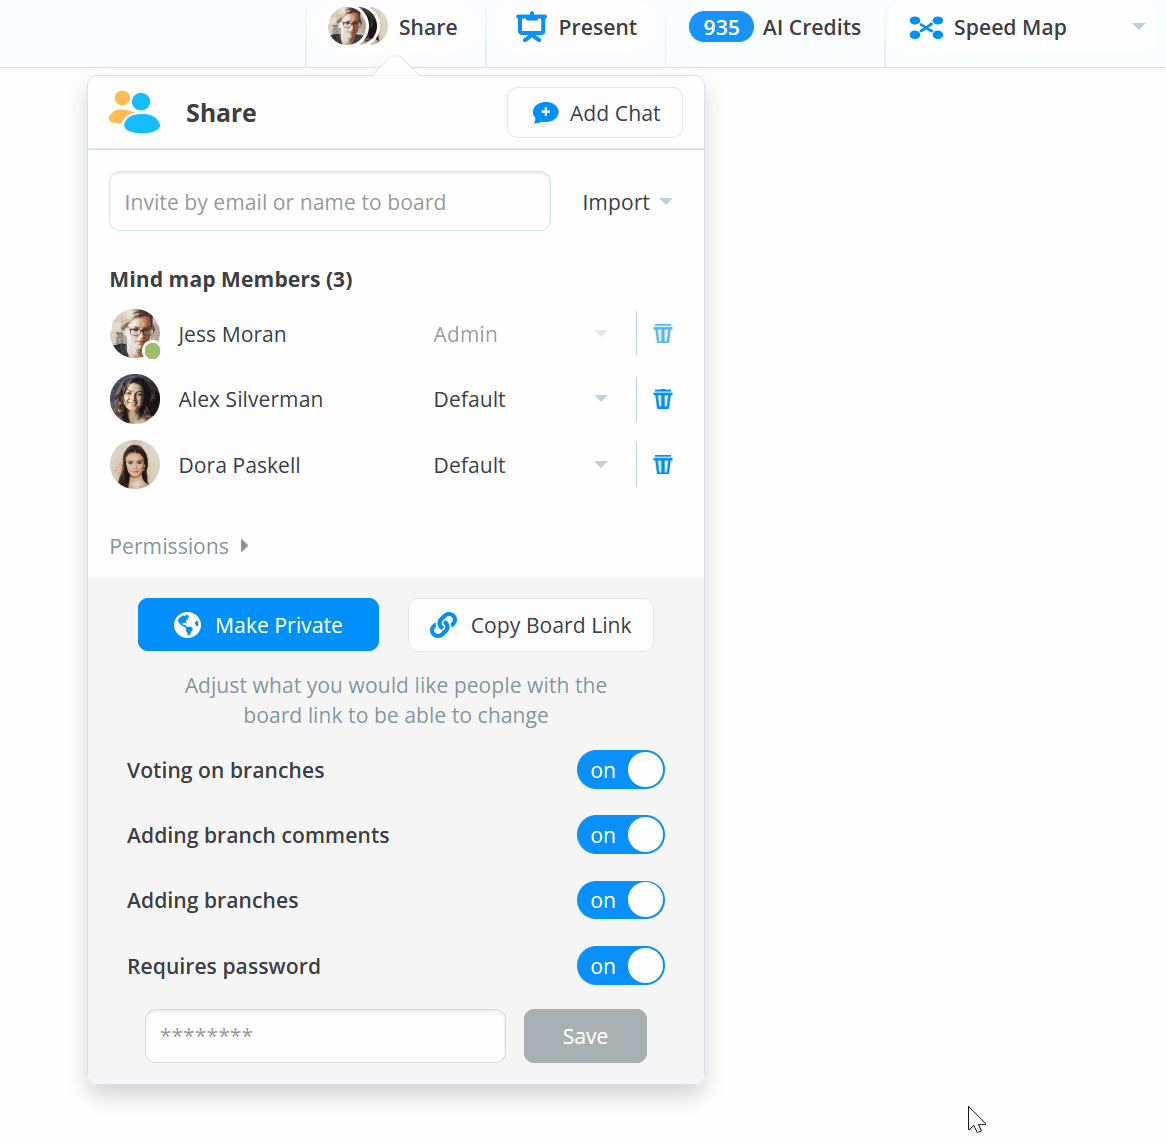 In the Share options unclicking the Make Public setting.